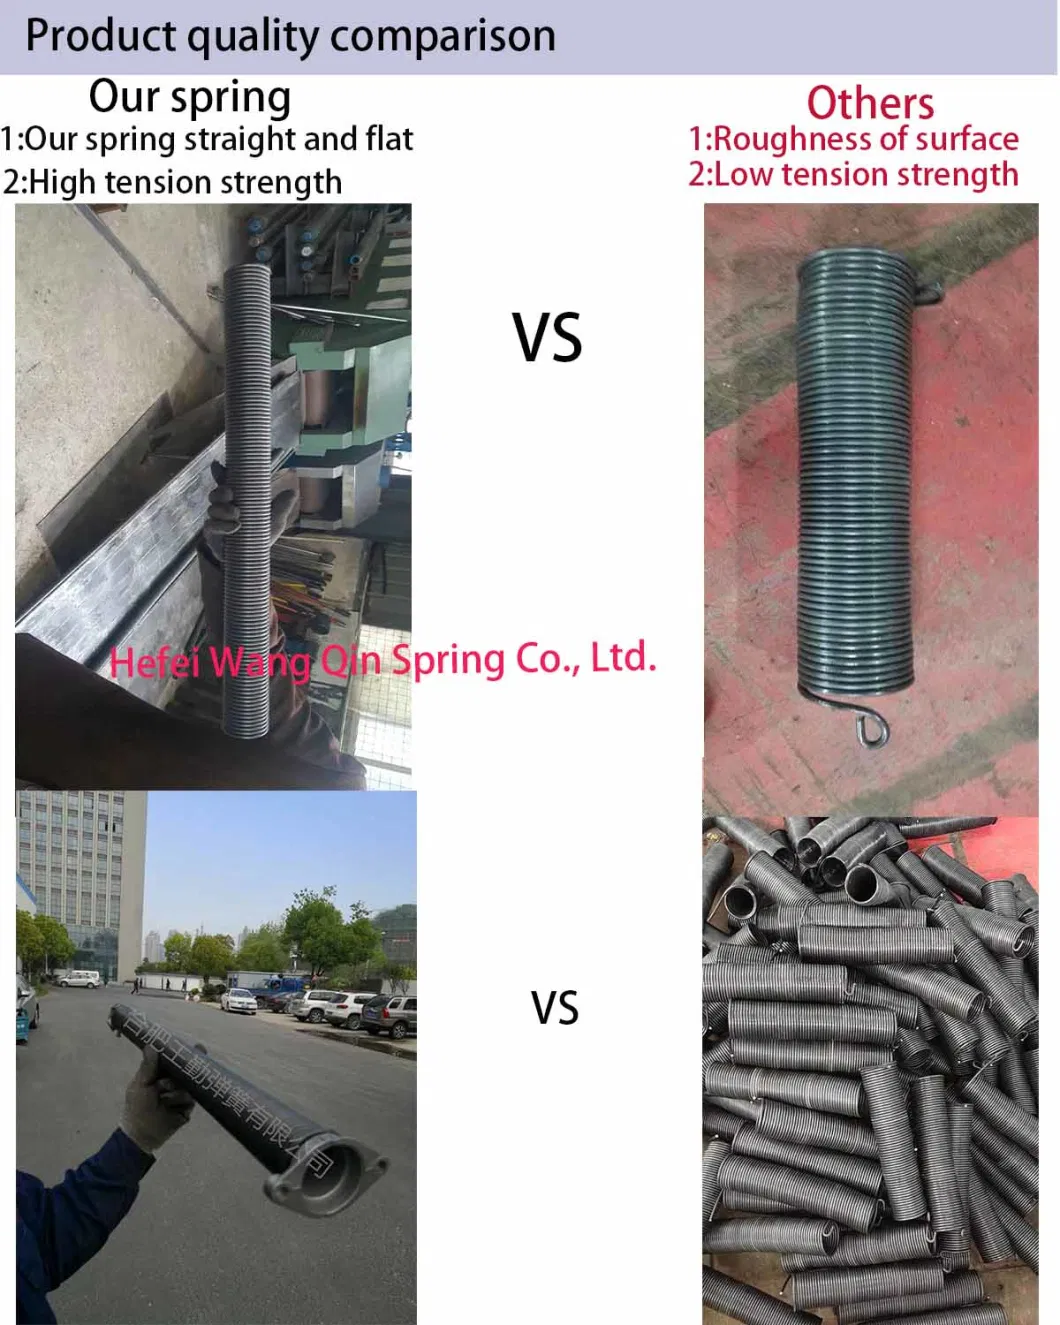 Double Looped Added Strength Extension Spring for Roller Shutter Doors